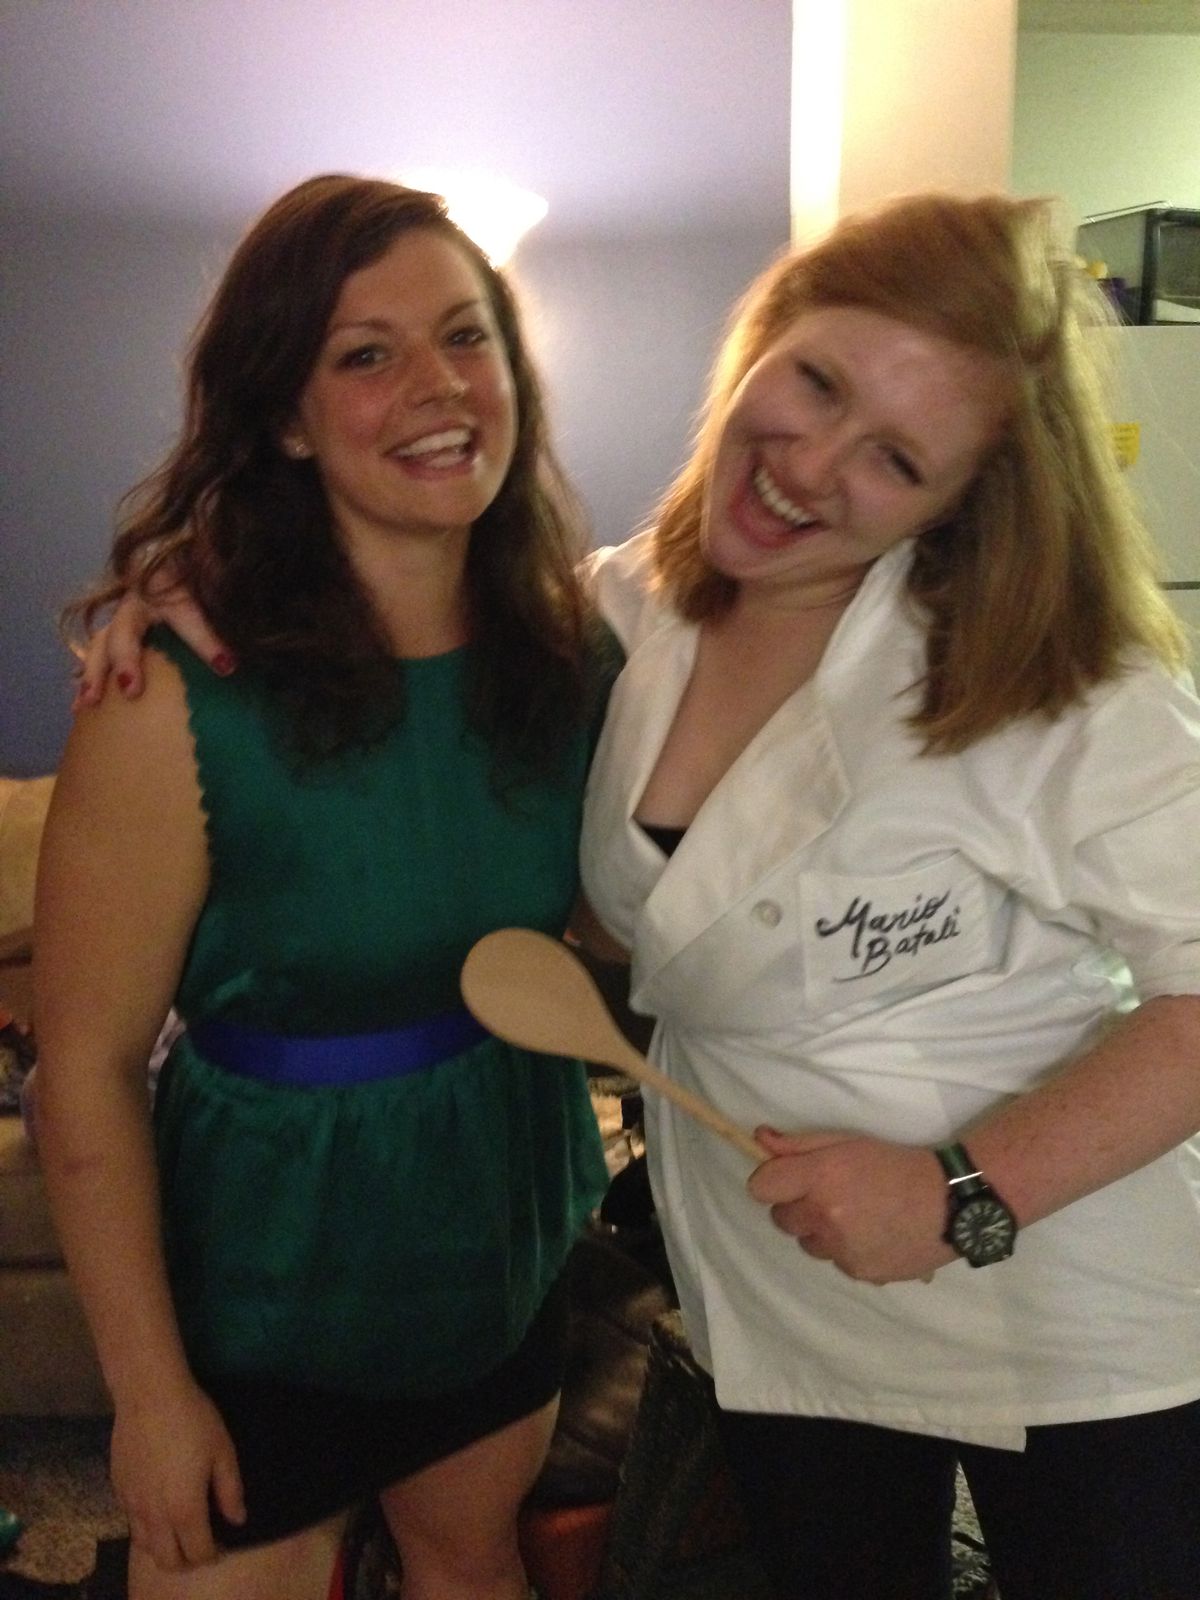 A woman dressed up as Mario Batali with her friend for Halloween.